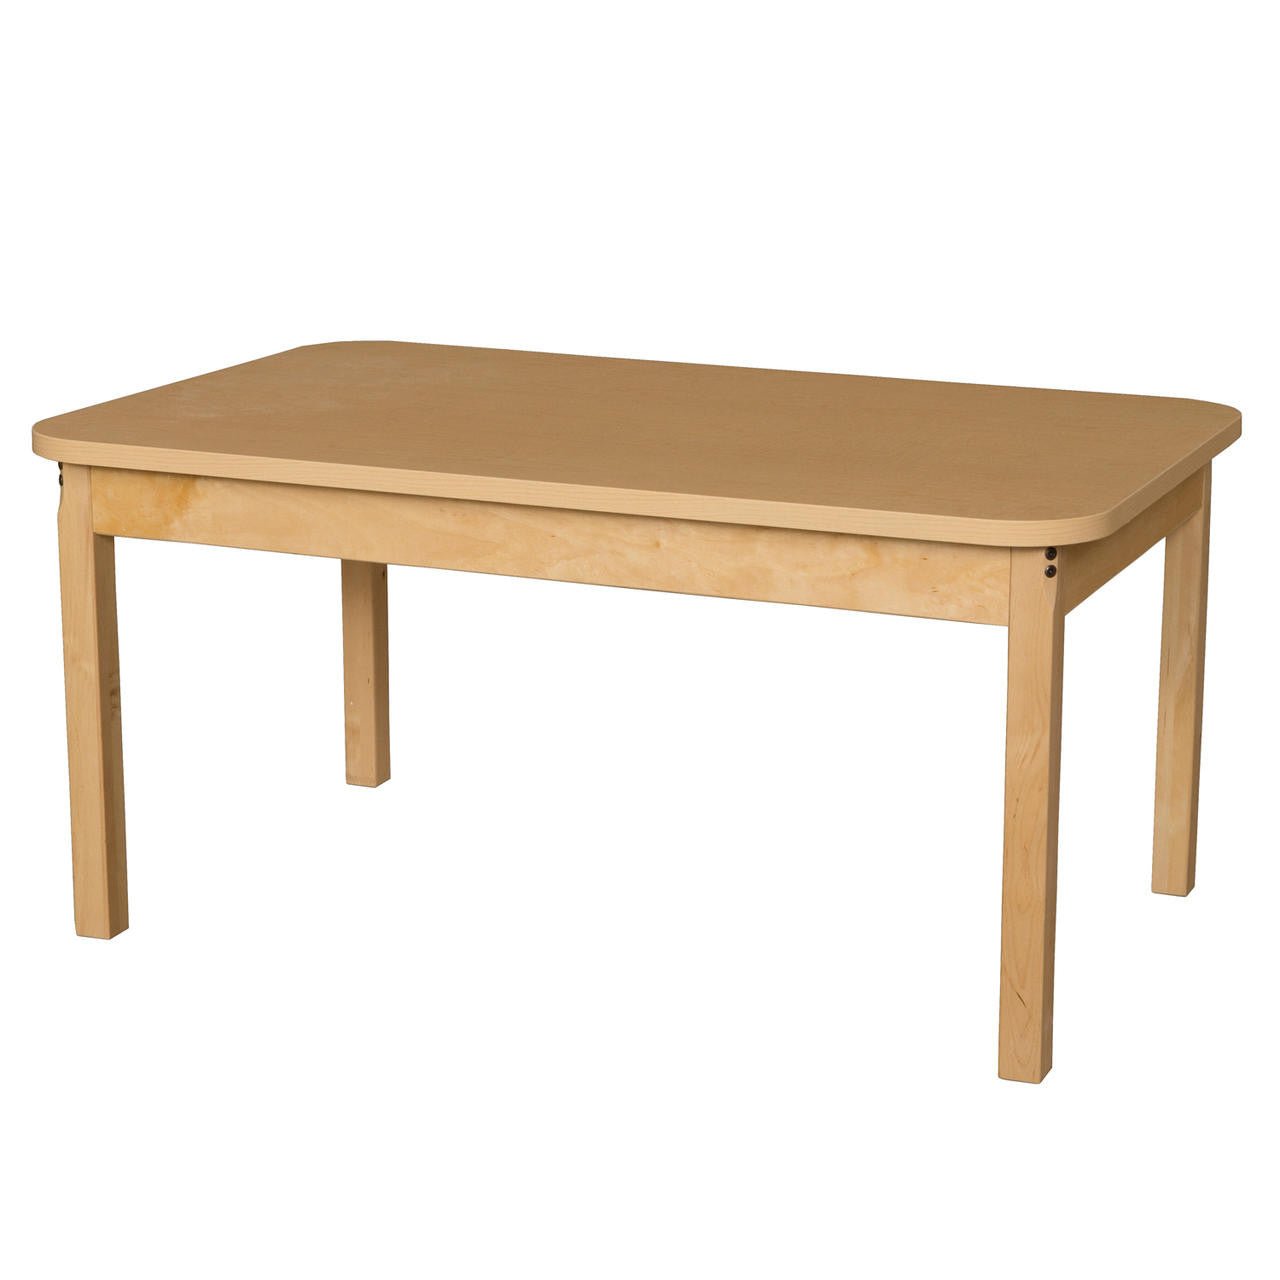 Rectangle High Pressure Laminate Table with Hardwood Legs- 24"